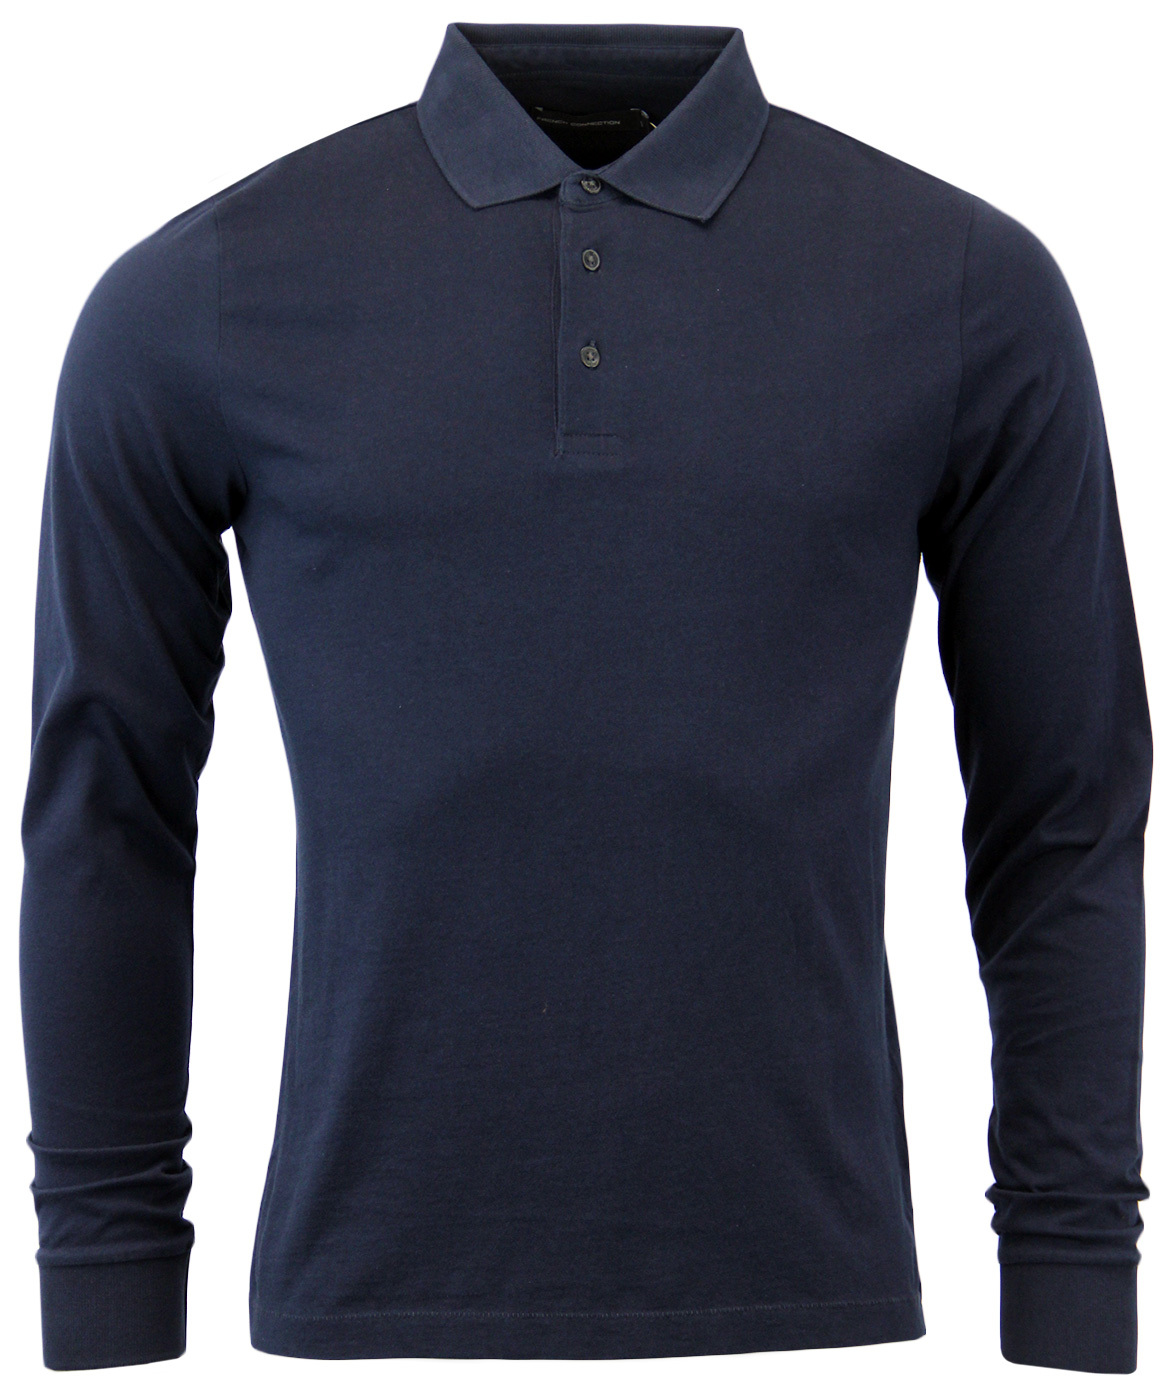 FRENCH CONNECTION Retro Mod Long Sleeved Polo in Marine Blue